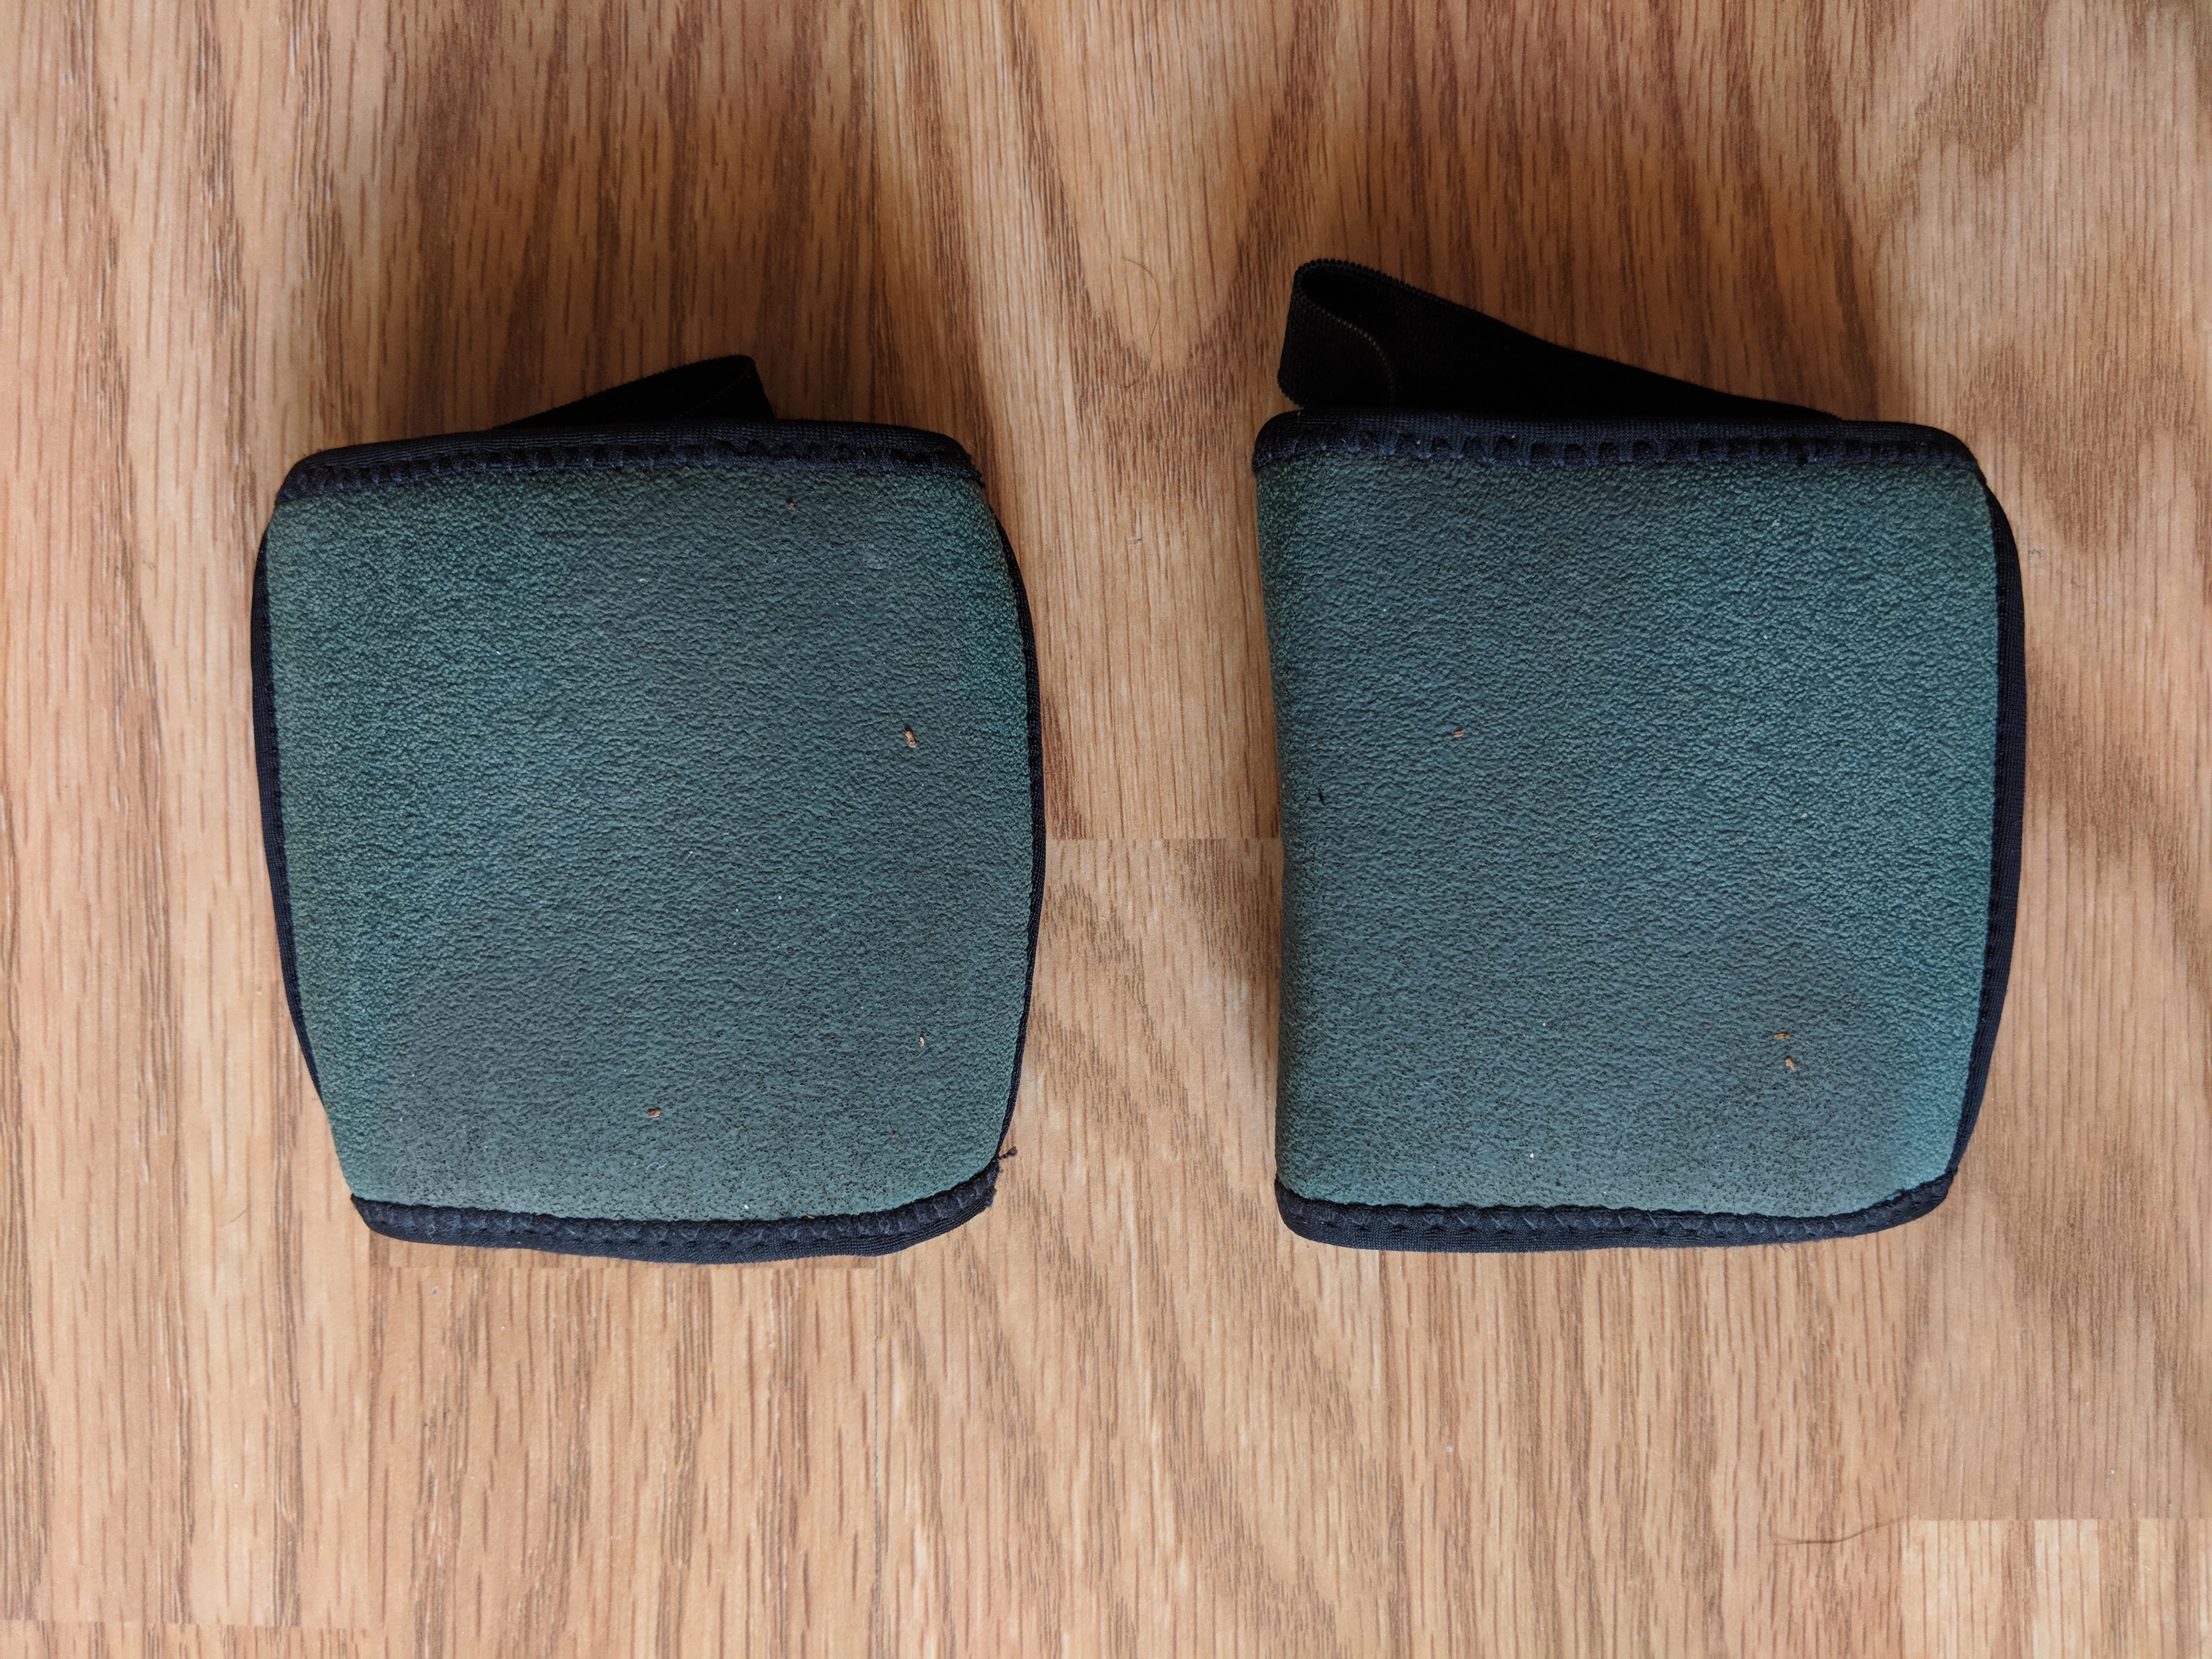 Yoga Paws Review - Wearable Foot Pads (bottom)